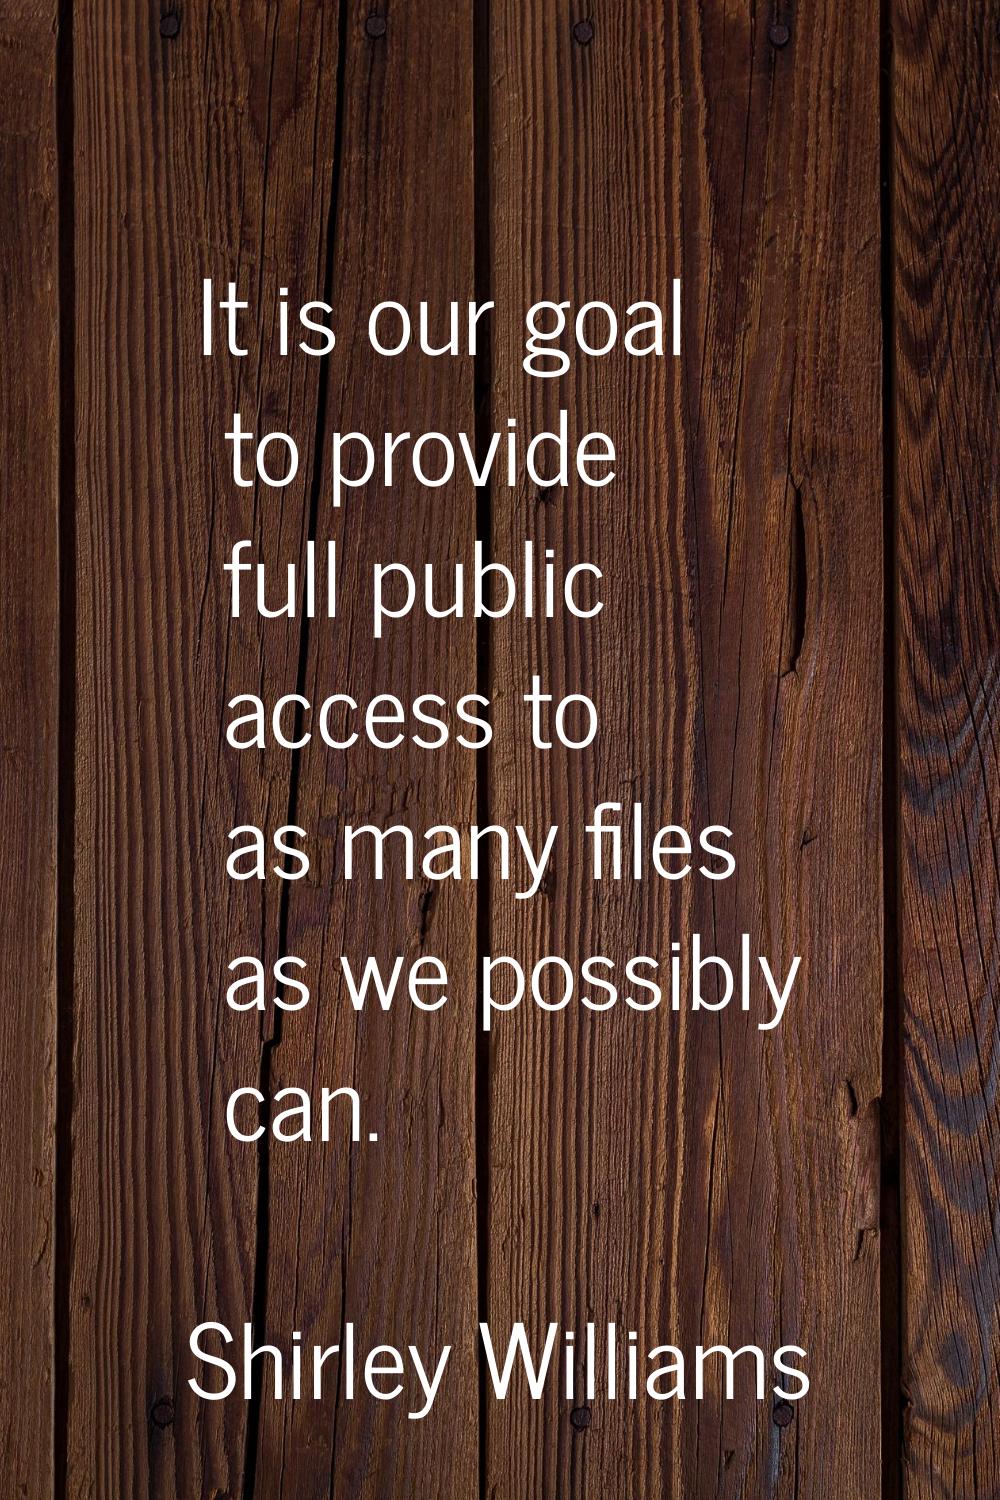 It is our goal to provide full public access to as many files as we possibly can.